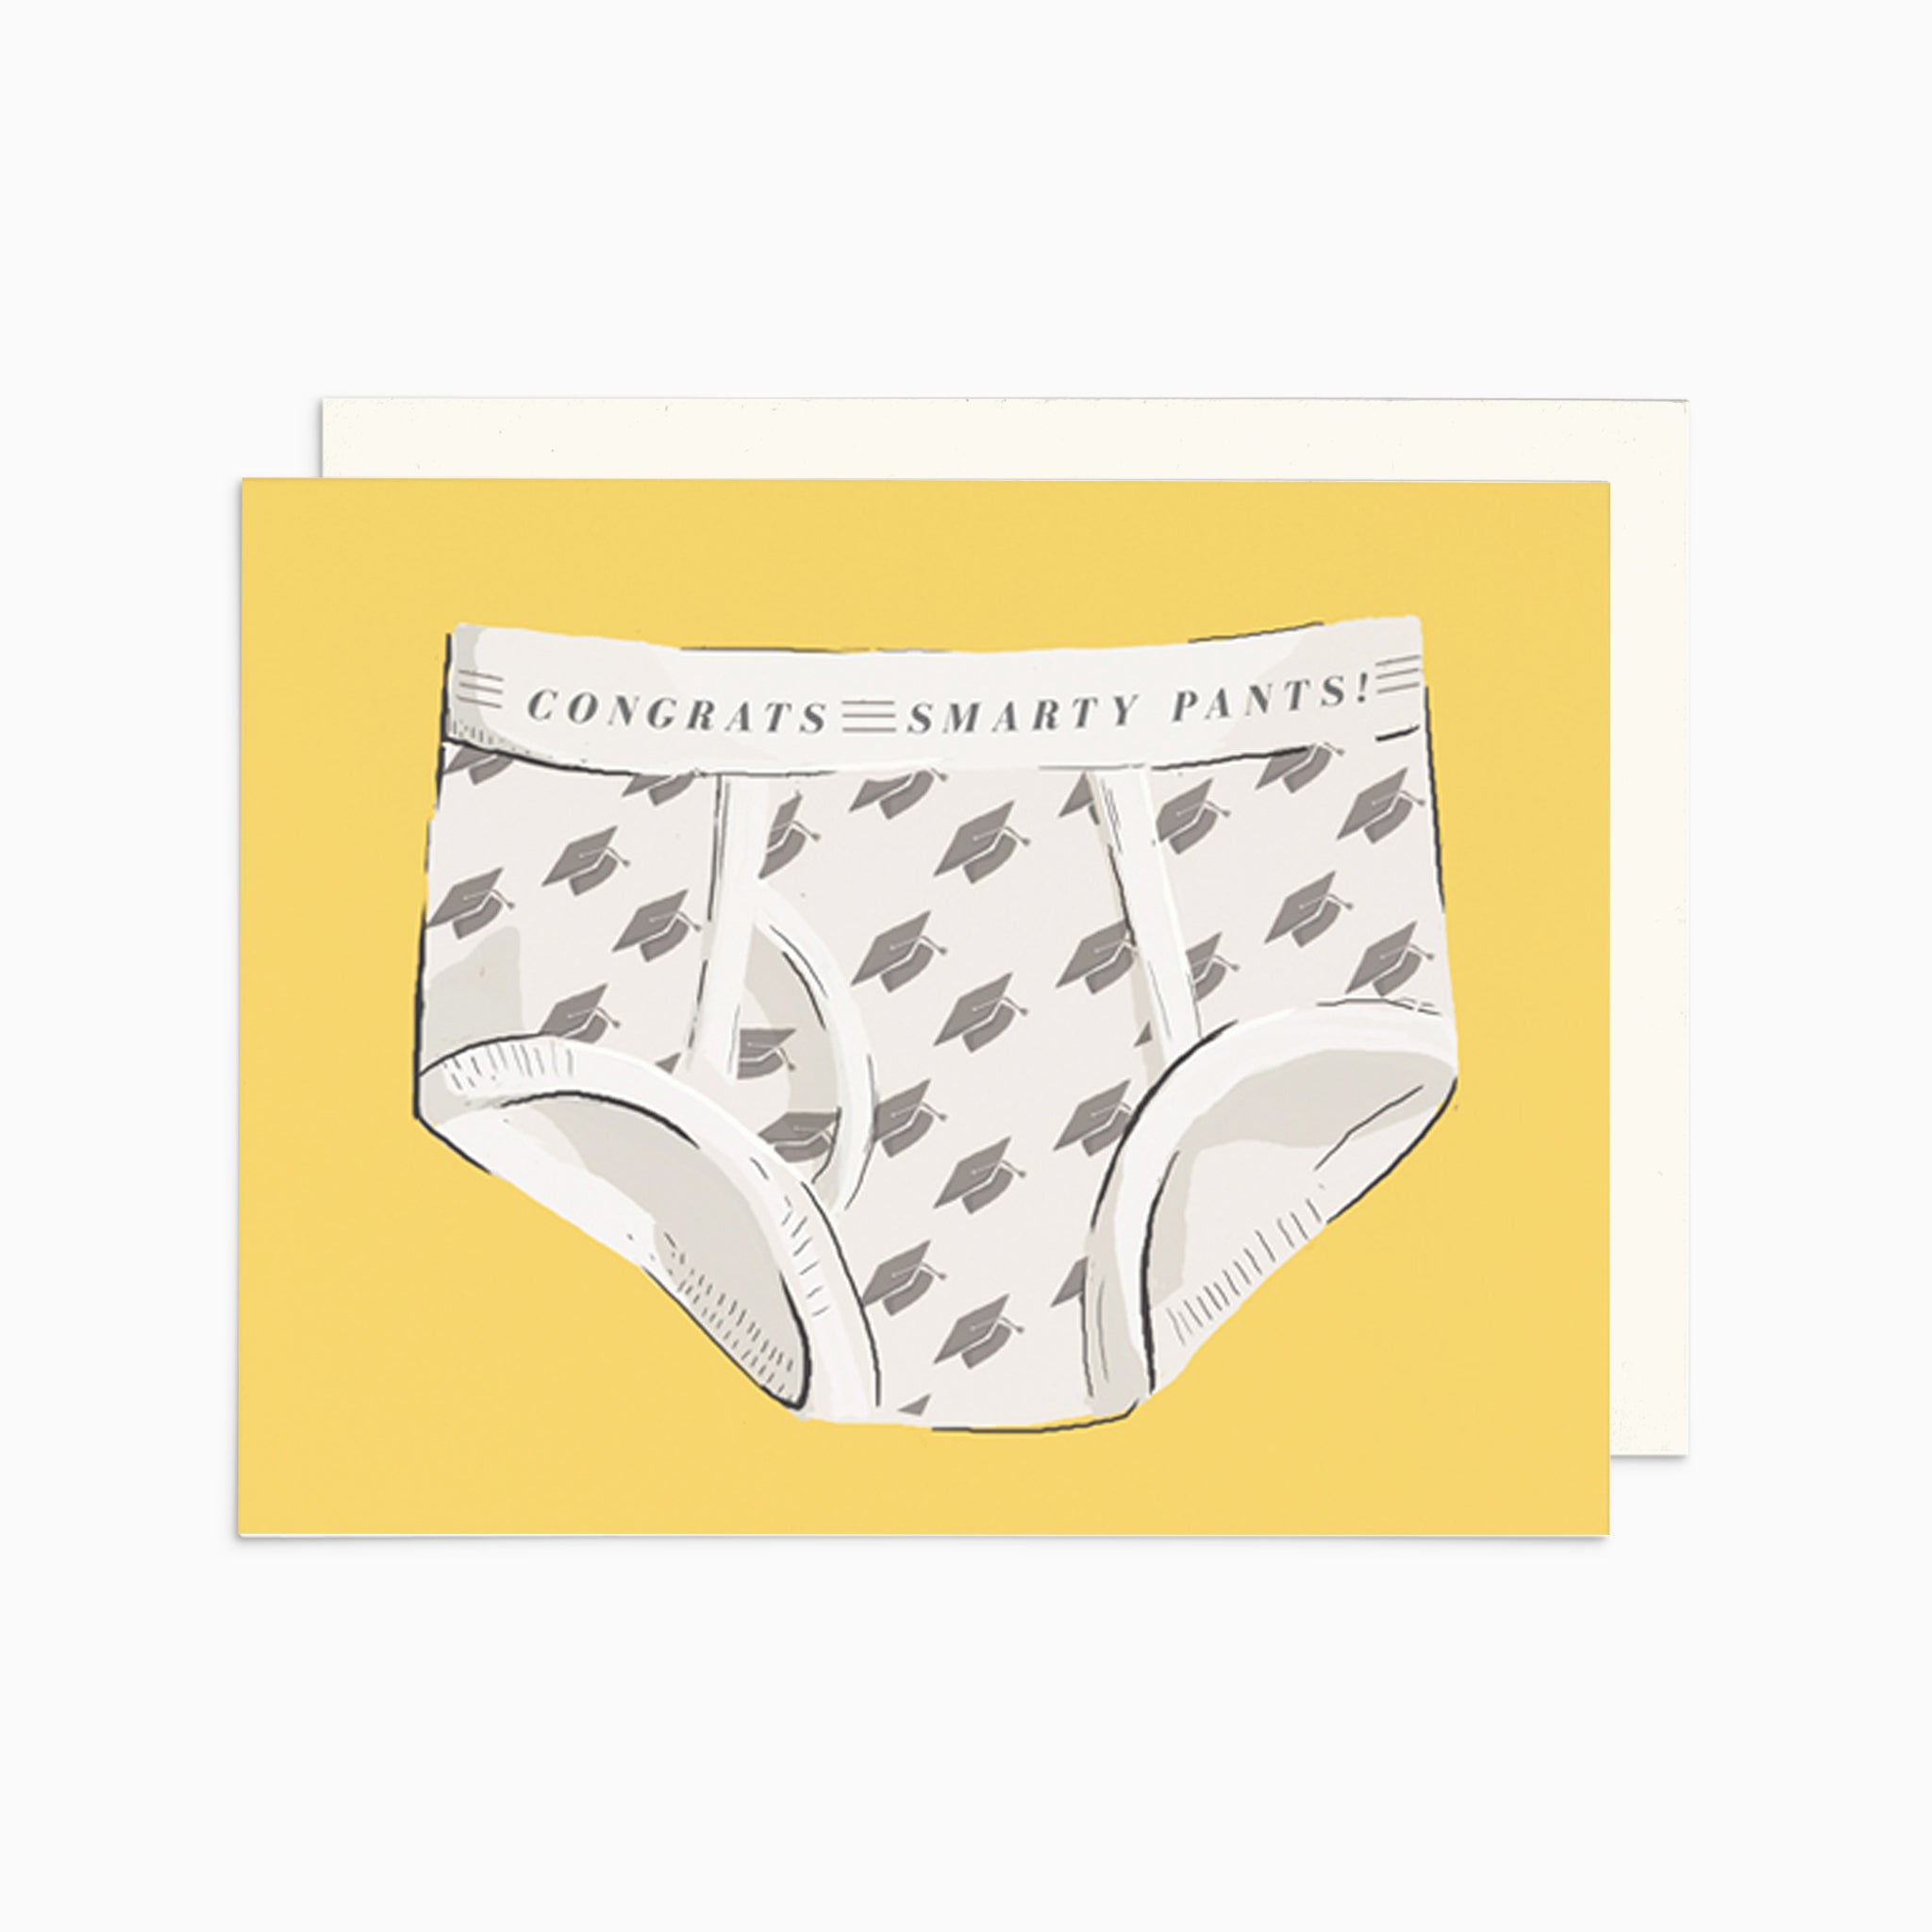 Illustrated congratulations graduation card on premium warm white cardstock, featuring a pair of undies with a graduation cap pattern and the text 'Congrats Smarty Pants' on the waistband, set against a bright yellow background.